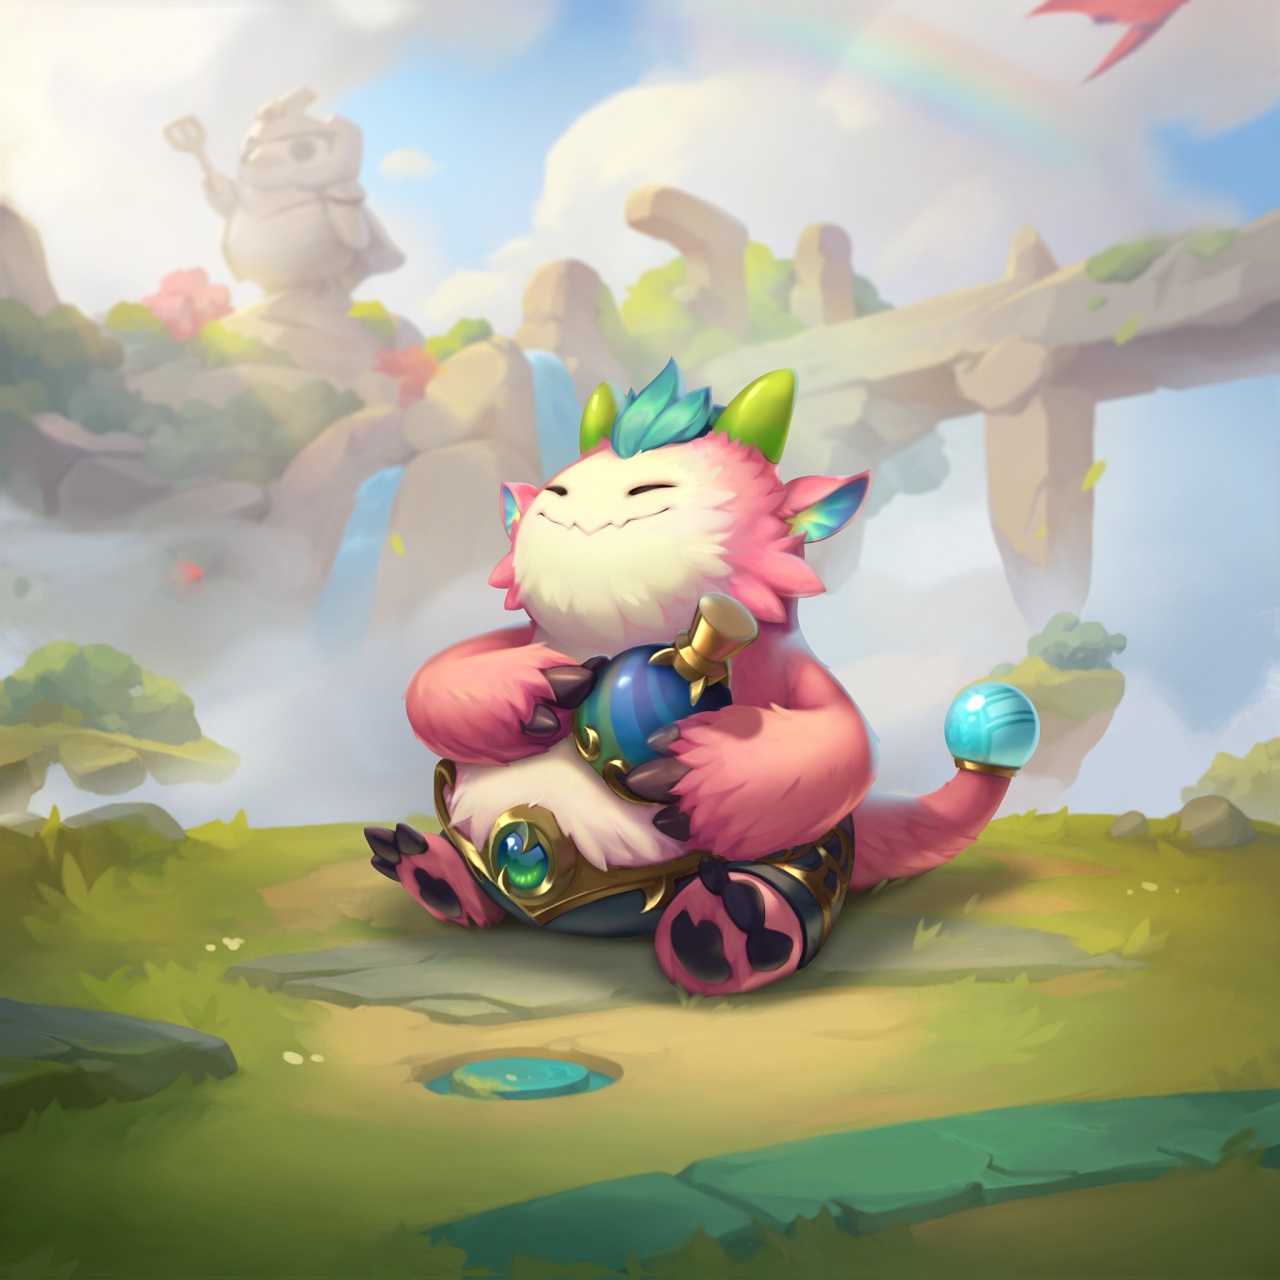 TFT Choncc the wise